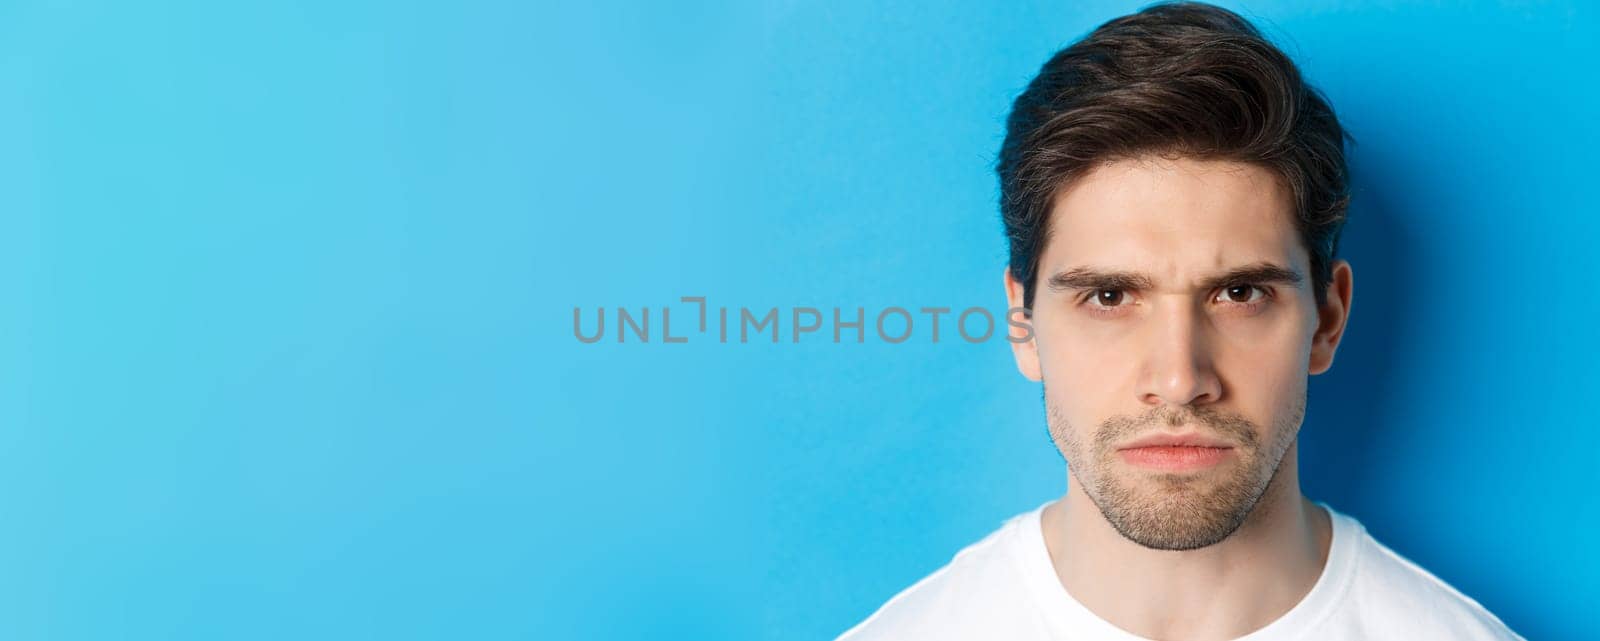 Headshot of angry man frowning, looking disappointed and bothered, standing over blue background.